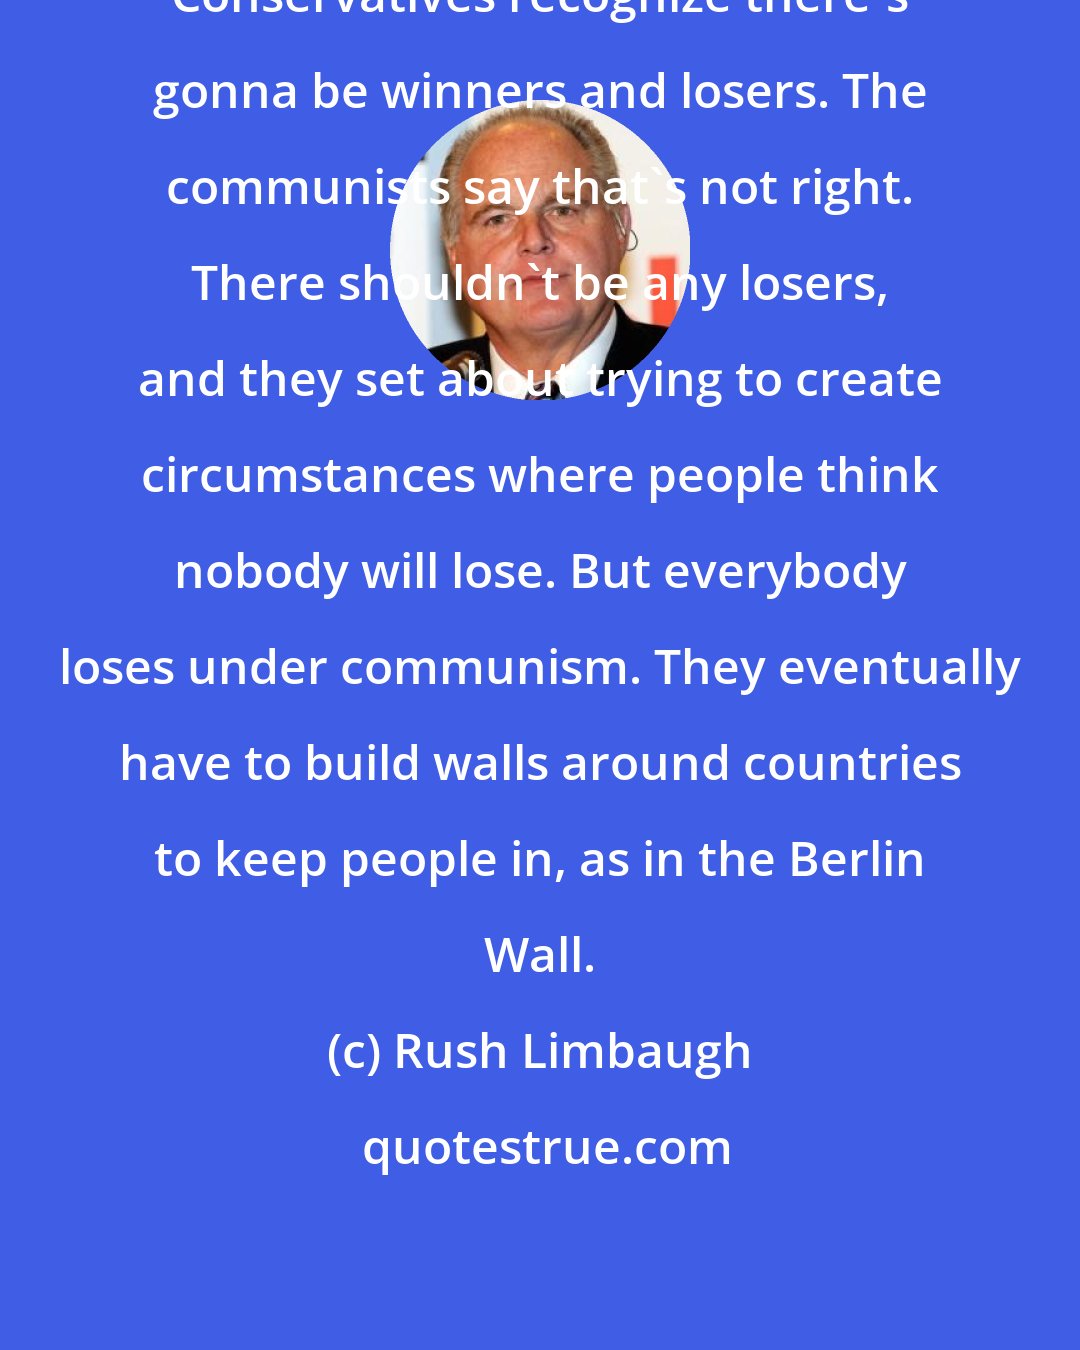 Rush Limbaugh: Conservatives recognize there's gonna be winners and losers. The communists say that's not right. There shouldn't be any losers, and they set about trying to create circumstances where people think nobody will lose. But everybody loses under communism. They eventually have to build walls around countries to keep people in, as in the Berlin Wall.